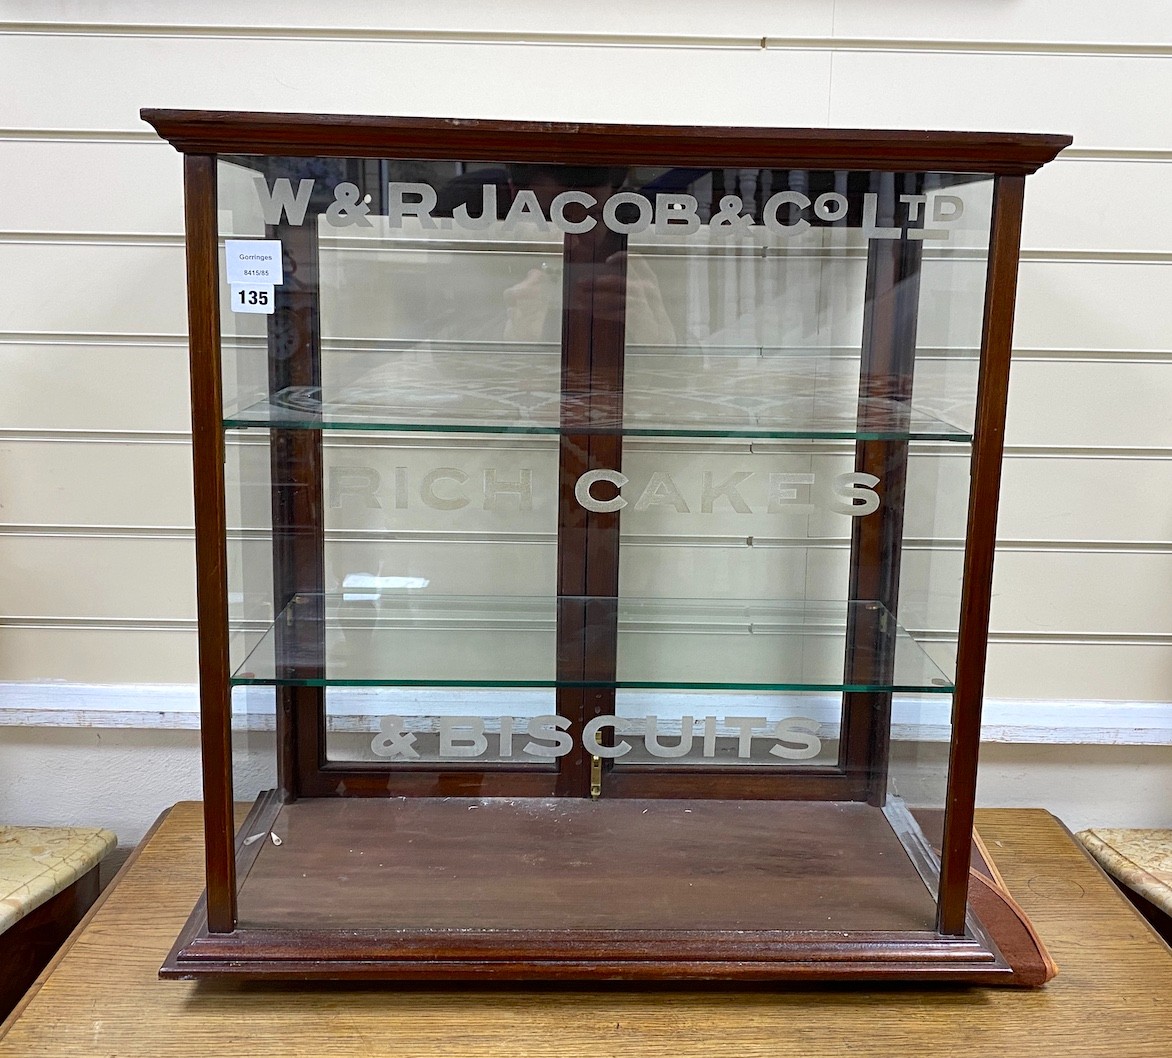 A late Victorian W & R. Jacobs & Co. Ltd. mahogany shop display cabinet, width 66cm, depth 34cm, height 66cm